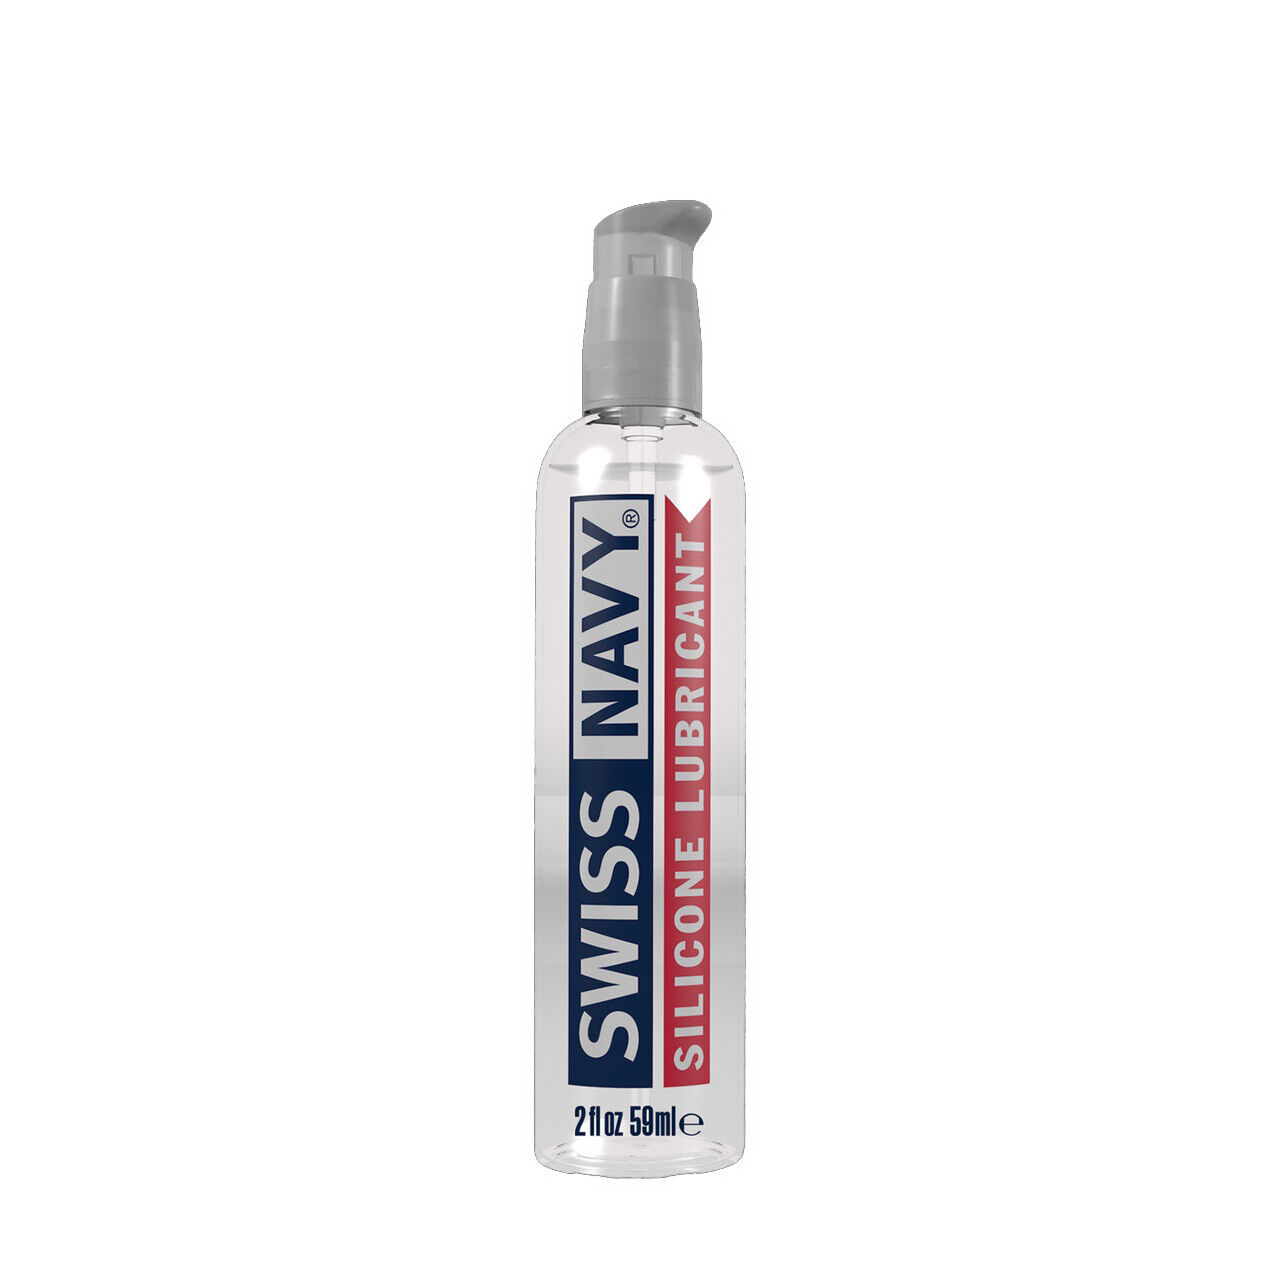 SWISS NAVY SILICONE Based Personal Lubricant Premium Sex Glide Lube Long Lasting